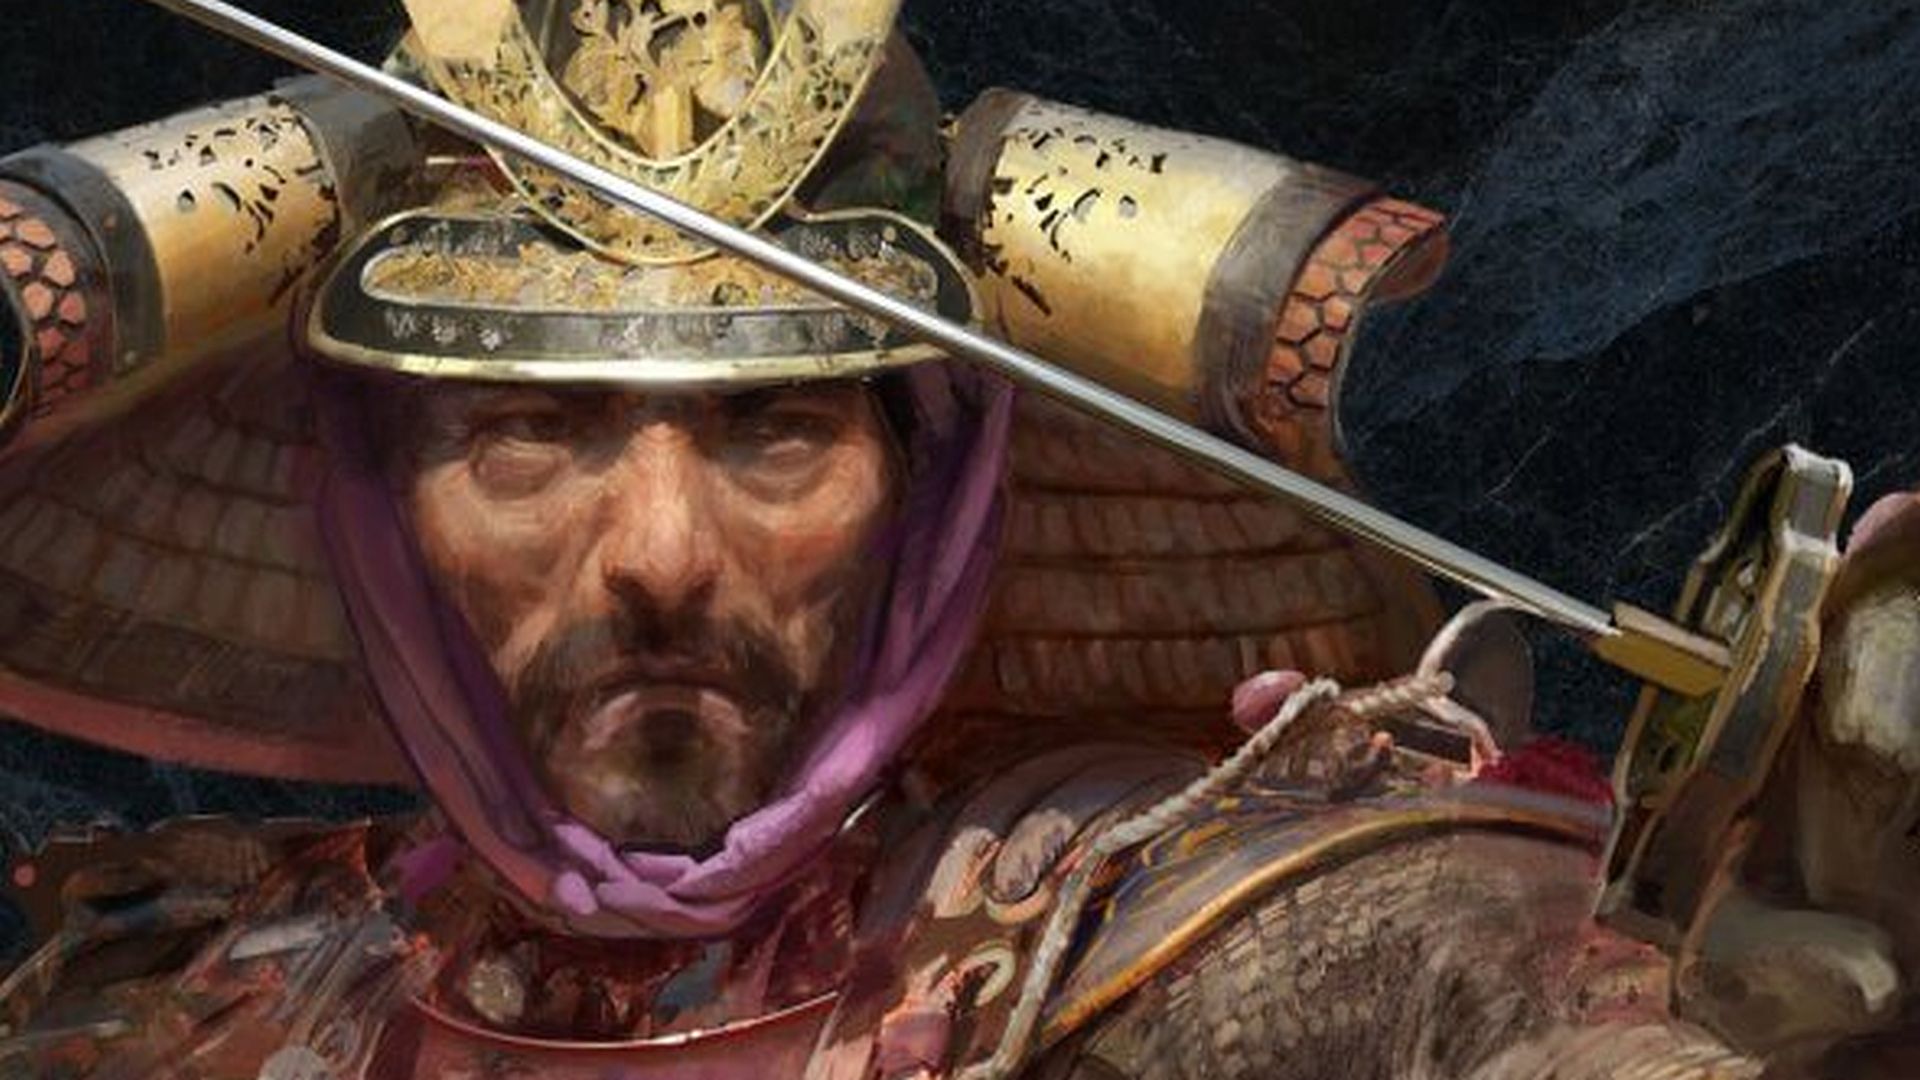 Huge Age of Empires 2: DE update adds co-op campaigns, gameplay systems, more